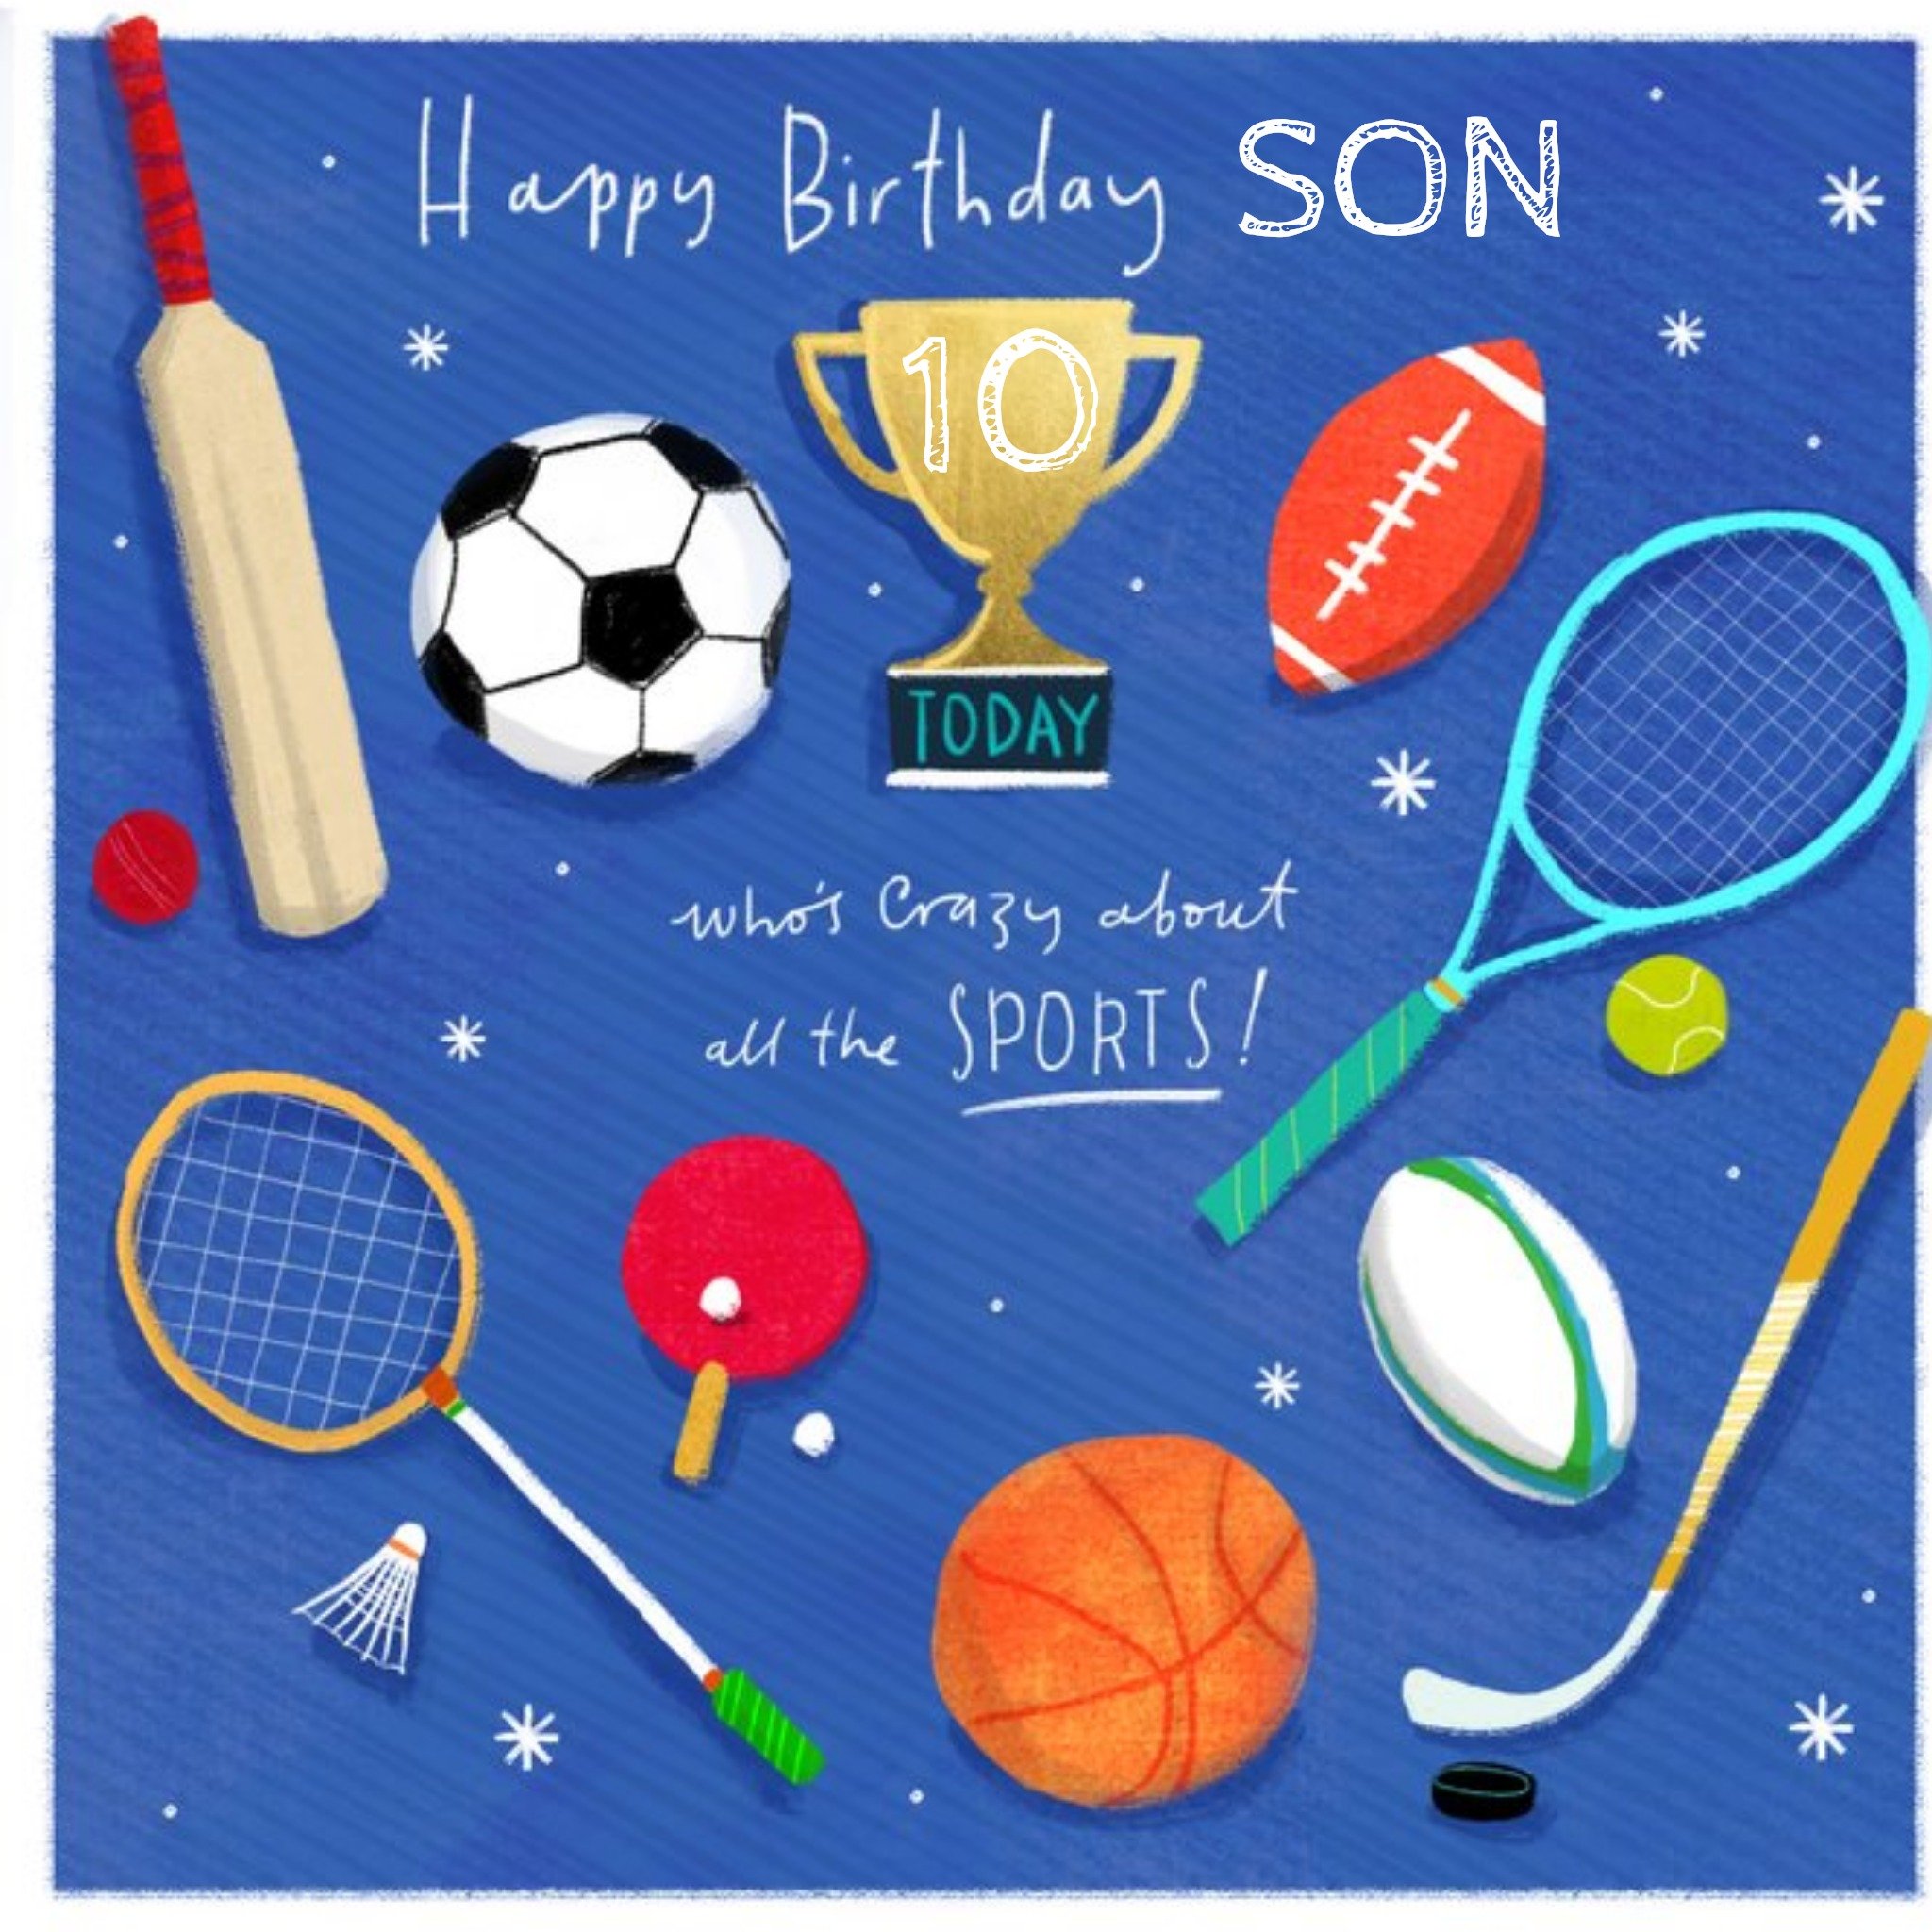 Moonpig Crazy About Sports Illustrated Birthday Card, Large